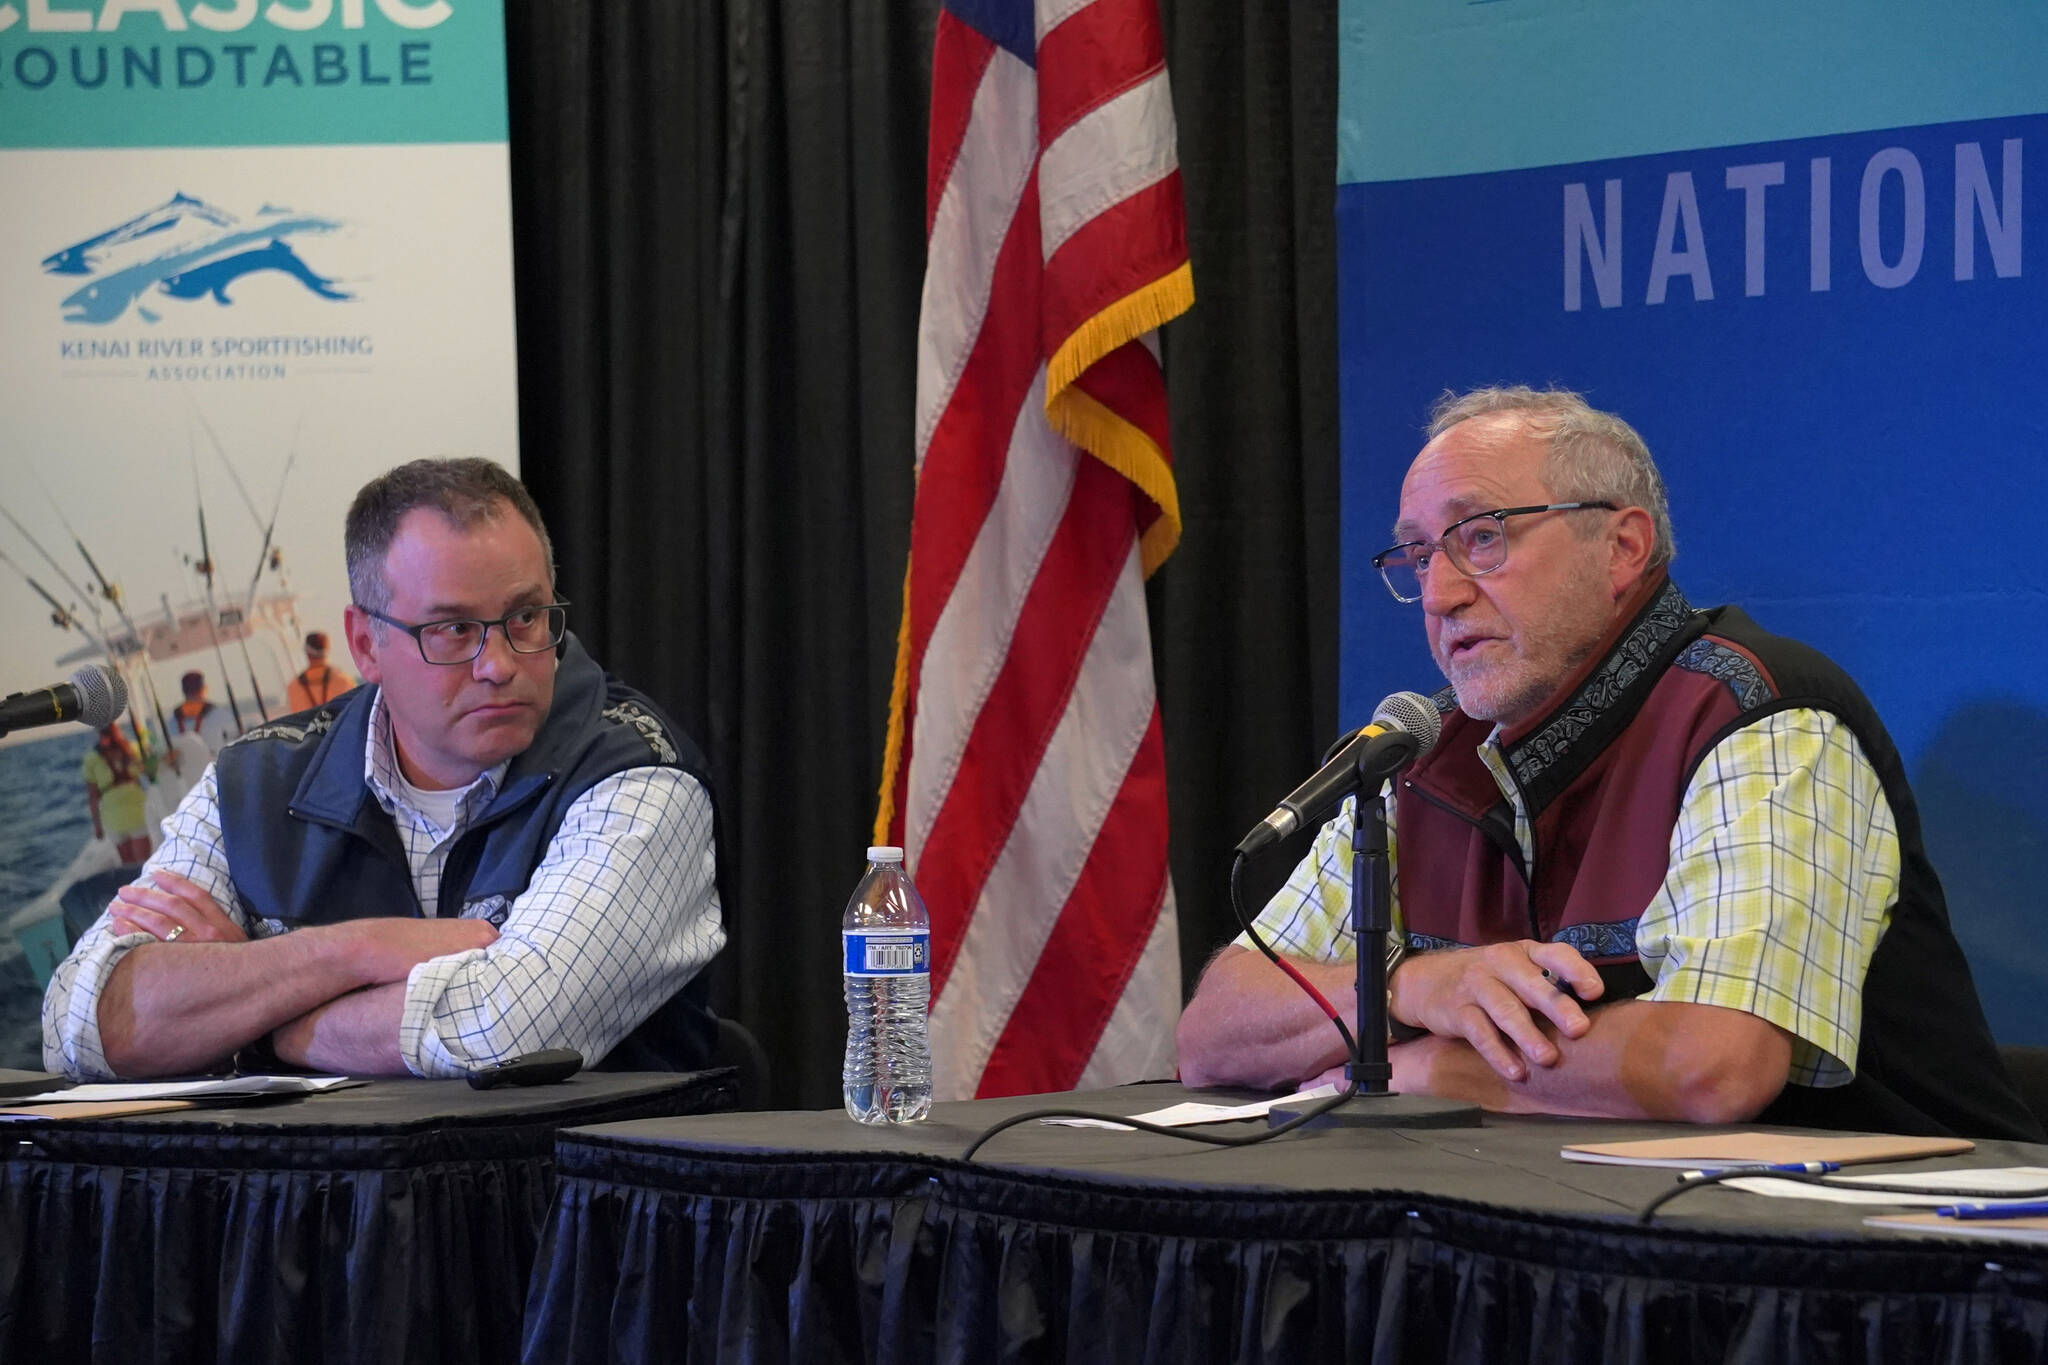 Bureau of Land Management Alaska Director Steve Cohn and Alaska Department of Fish and Game Commissioner Doug Vincent-Lang participate in a panel discussion at the Kenai River Sportfishing Association’s Kenai Classic Roundtable at the Soldotna Regional Sports Complex in Soldotna, Alaska, on Wednesday, Aug. 23, 2023. (Jake Dye/Peninsula Clarion)